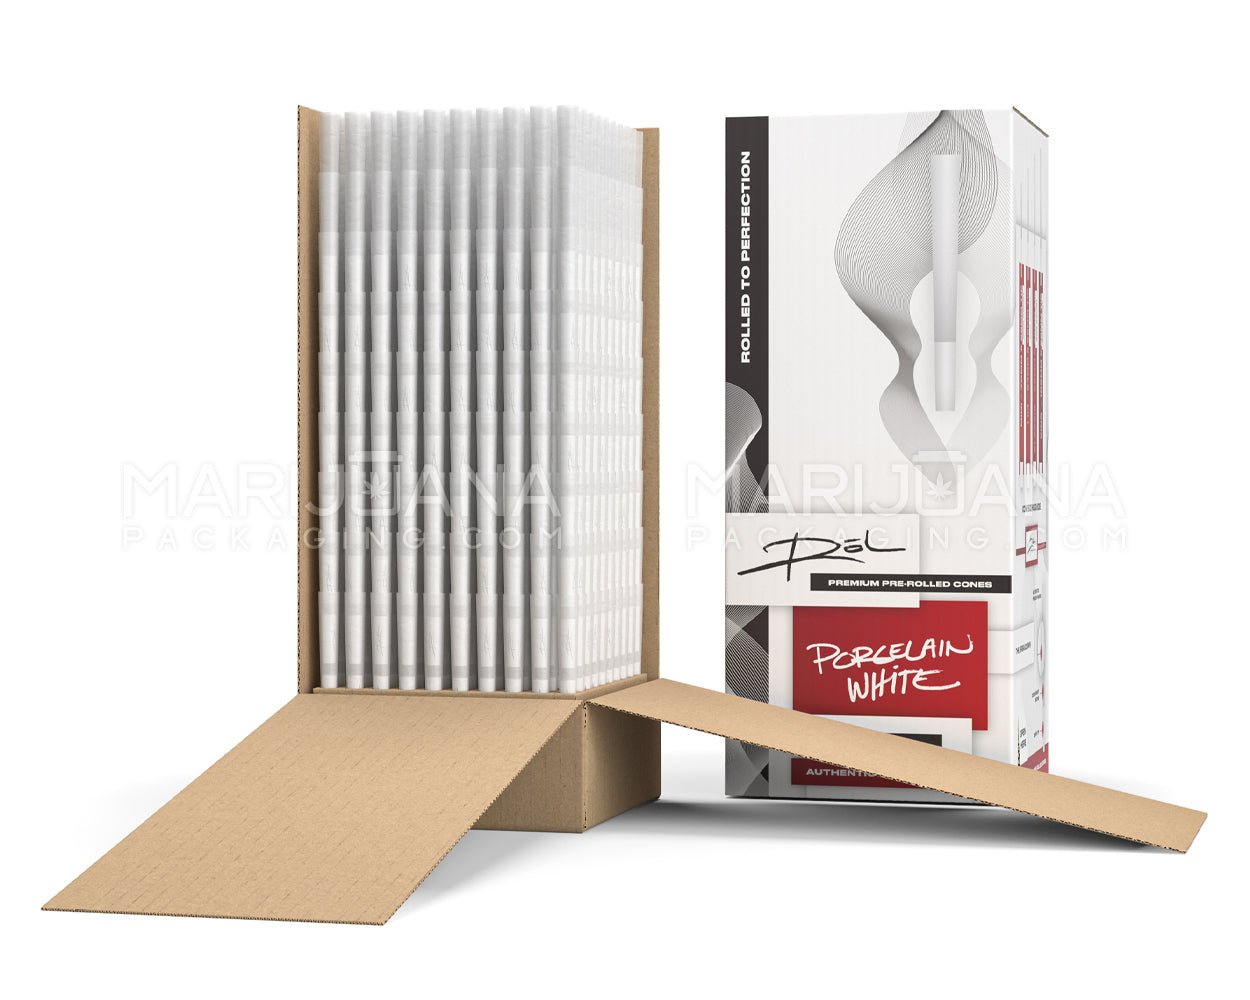 RōL | 1 1/4th Size Pre-Rolled Cones | 84mm - Porcelain White Paper - 900 Count - 4